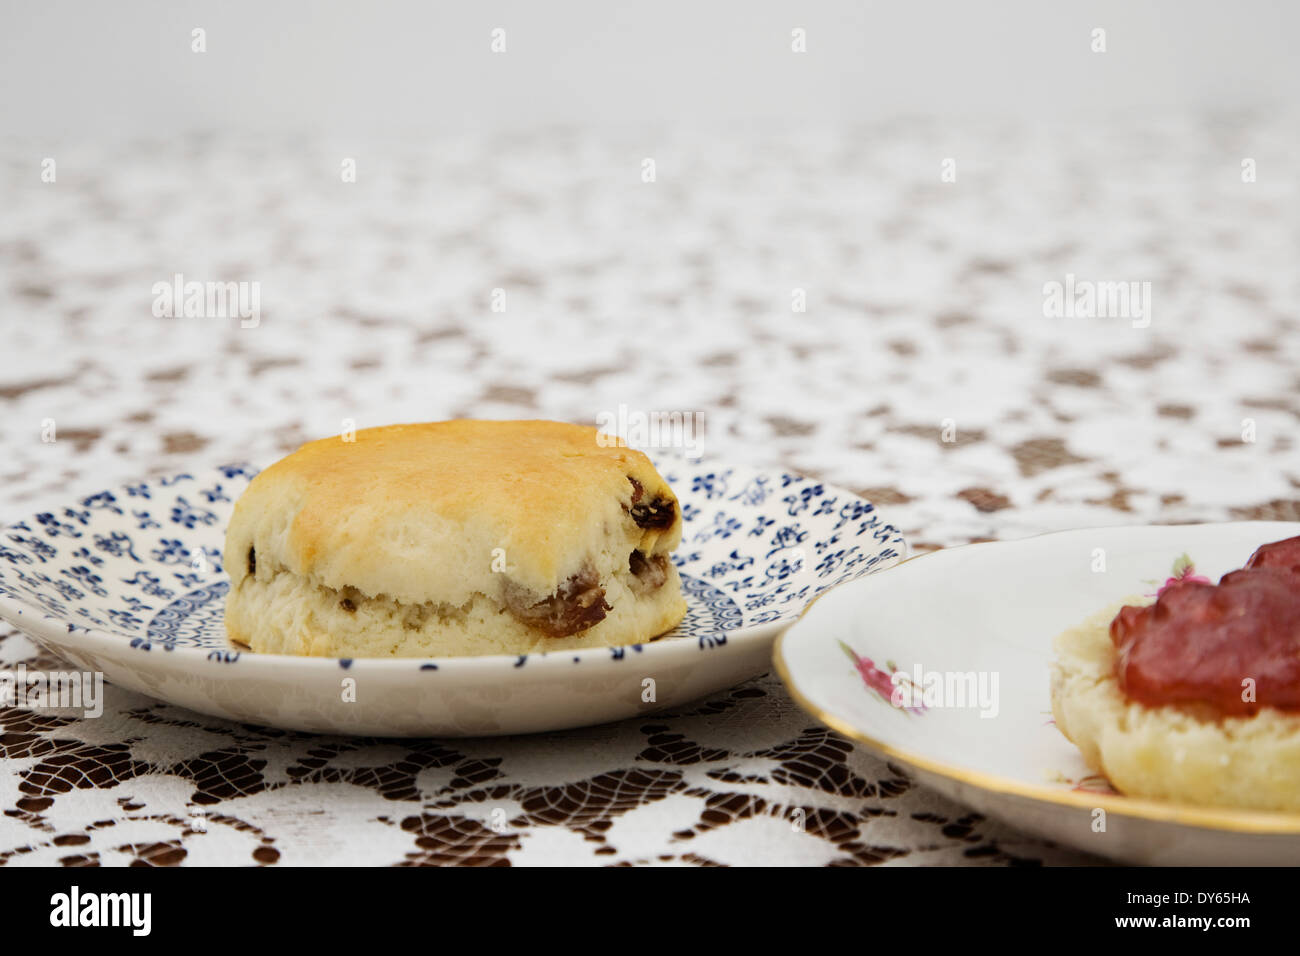 English Afternoon tea. Vintage plates with Scones and Jam on a flora tablecloth Stock Photo